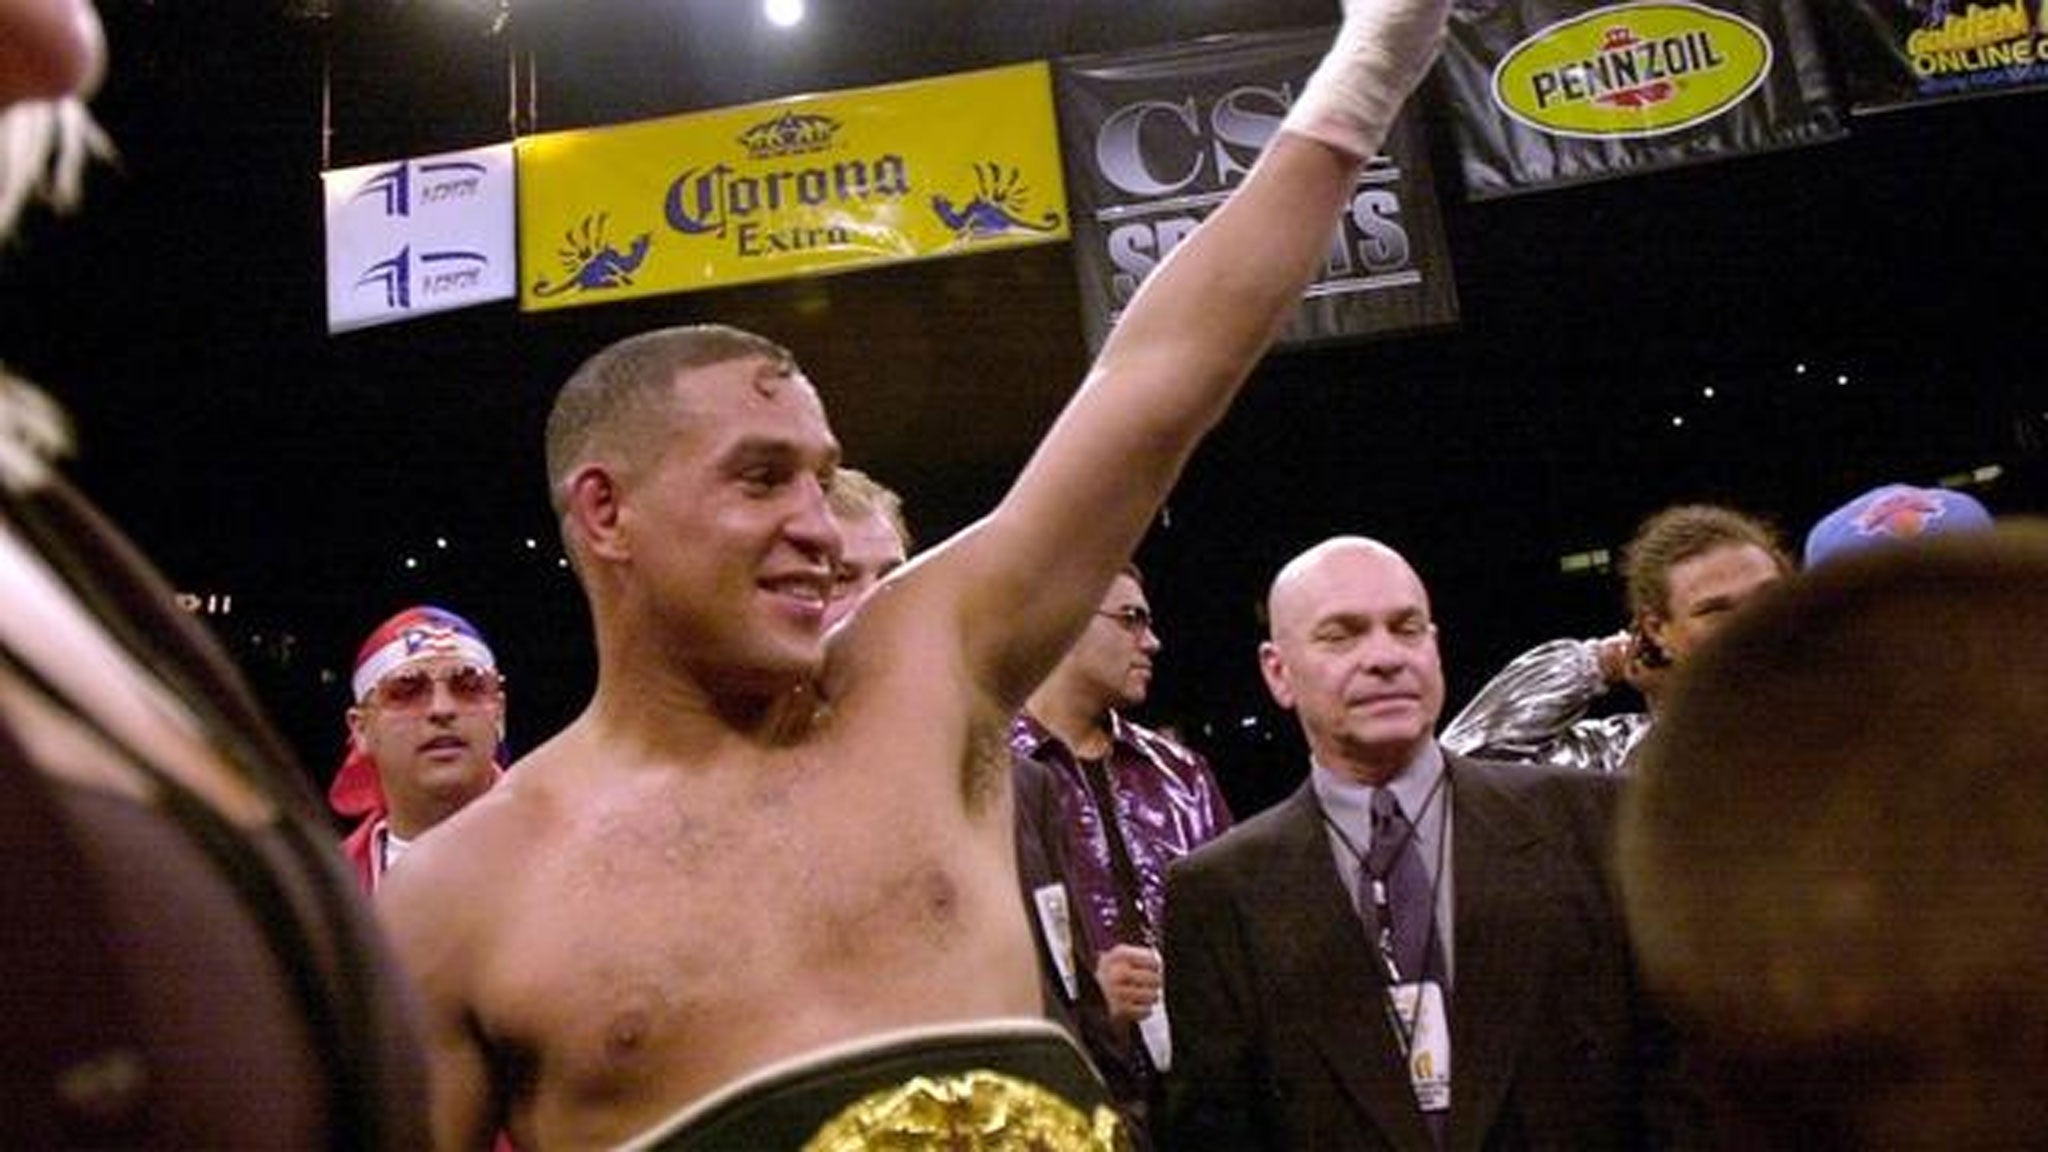 Doctors declare three-time world boxing champion Hector Camacho 'brain dead' after shooting